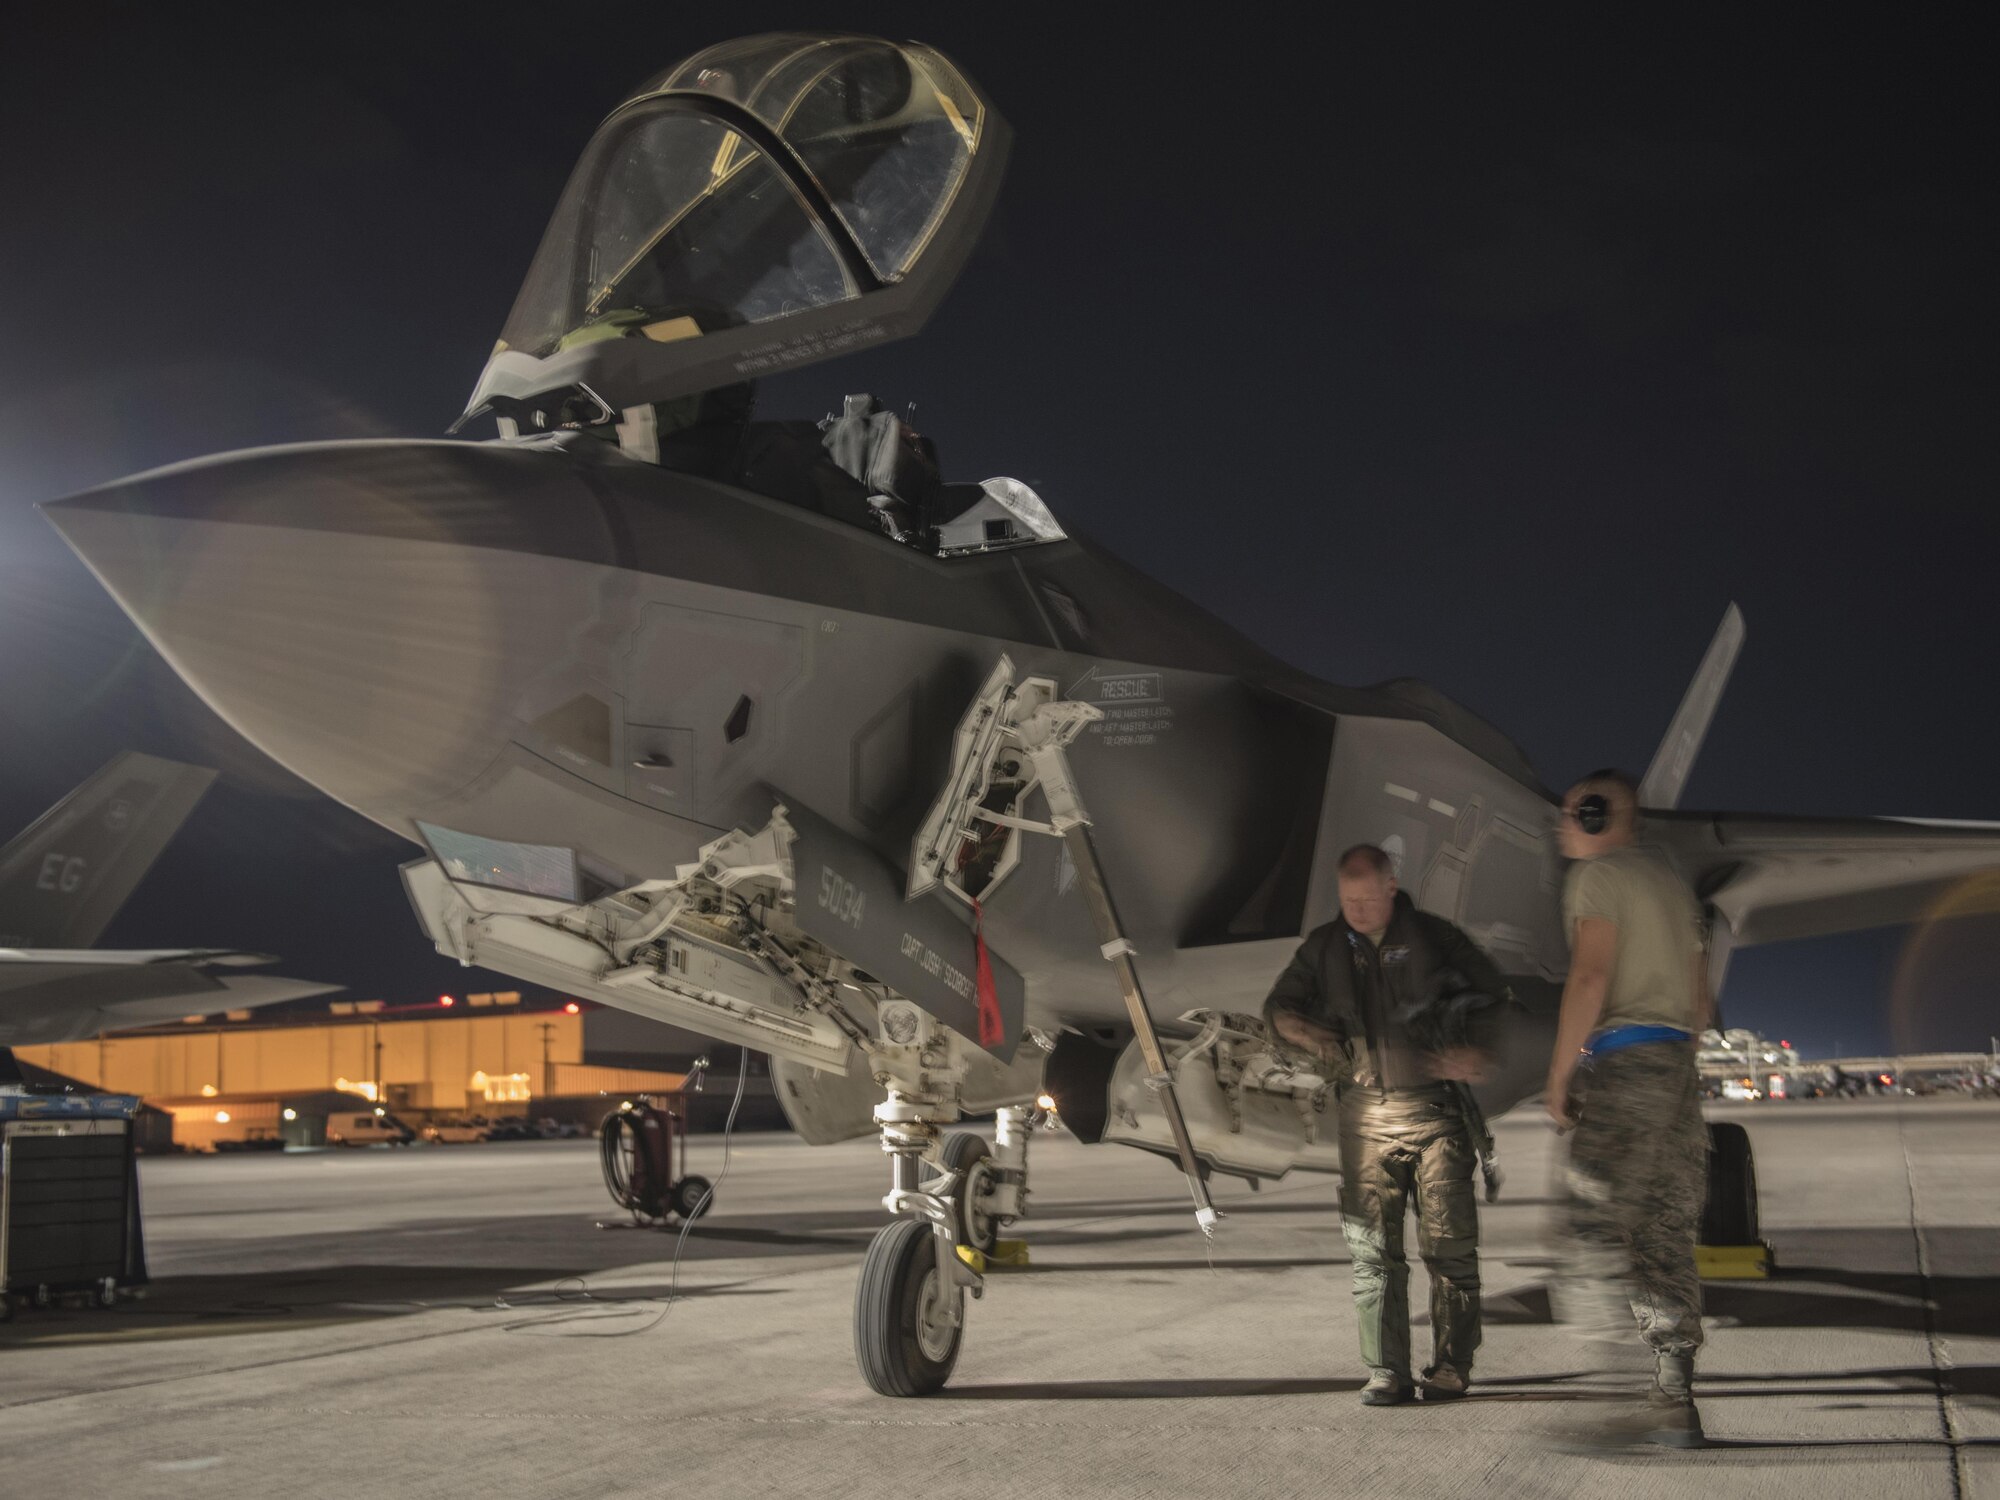 U.S. Air Force Reserve Lt. Col. Brett Robison, F-35 Lightning II Academic Training Center lead pilot, inspects an F-35A Lightning II July 18, 2017, at Nellis Air Force Base, Nev. The 33rd Fighter Wing and Marine Attack Squadron 221 from Yuma, Ariz., participated in the first combat exercise with Air Force F-35As and Marine Corps F-35Bs operating simultaneously during Red Flag 17-3. The large scale exercise, which was developed to provide pilots with critical experience in combat situations, enabled F-35 pilots to plan and train using the same tactics, techniques and procedures. (U.S. Air Force photo by Staff Sgt. Peter Thompson)